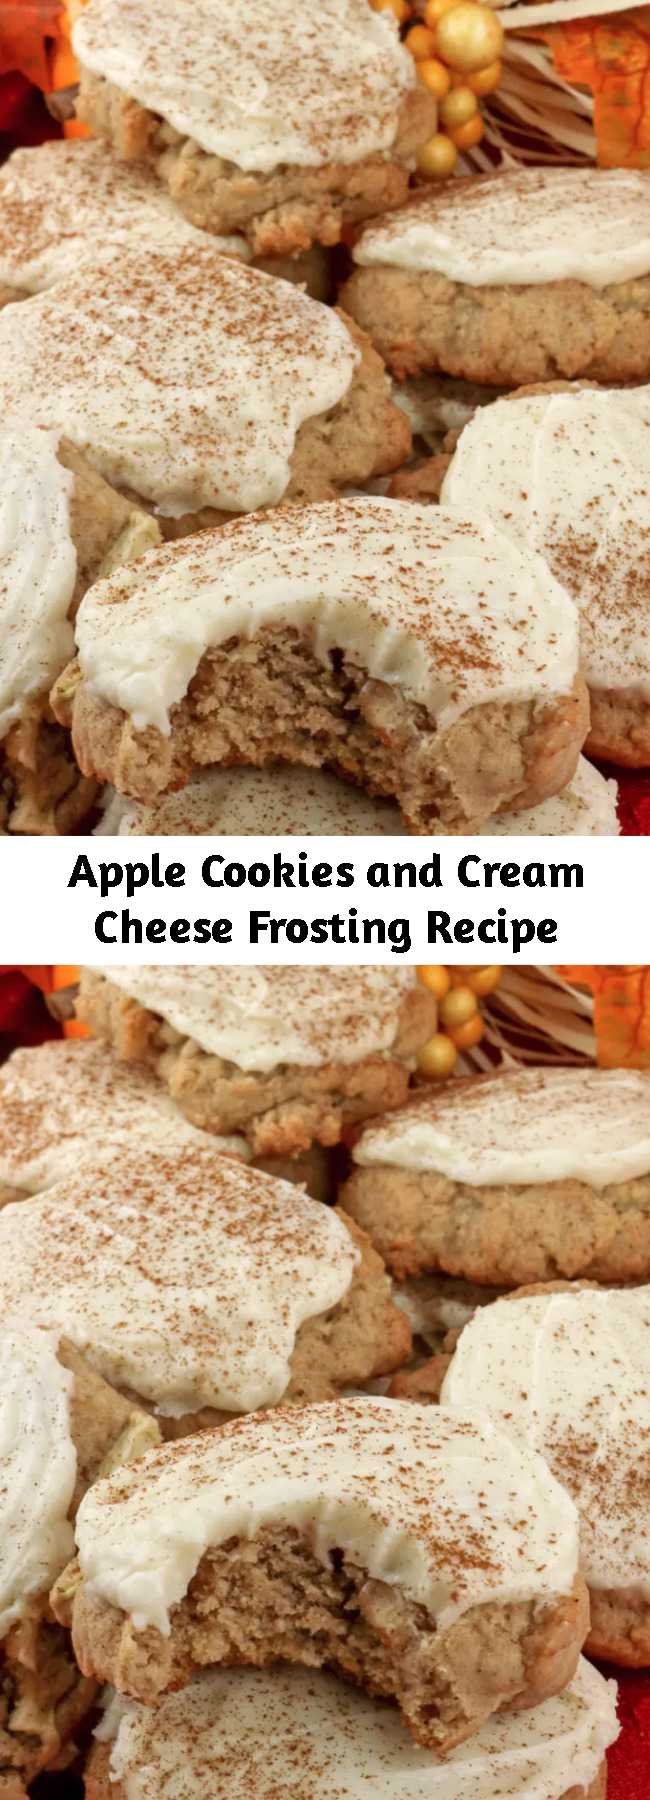 Apple Cookies and Cream Cheese Frosting Recipe - Apples and cinnamon combine in light, fluffy and delicious Apple Cookies with Cream Cheese Frosting that is a true family favorite.